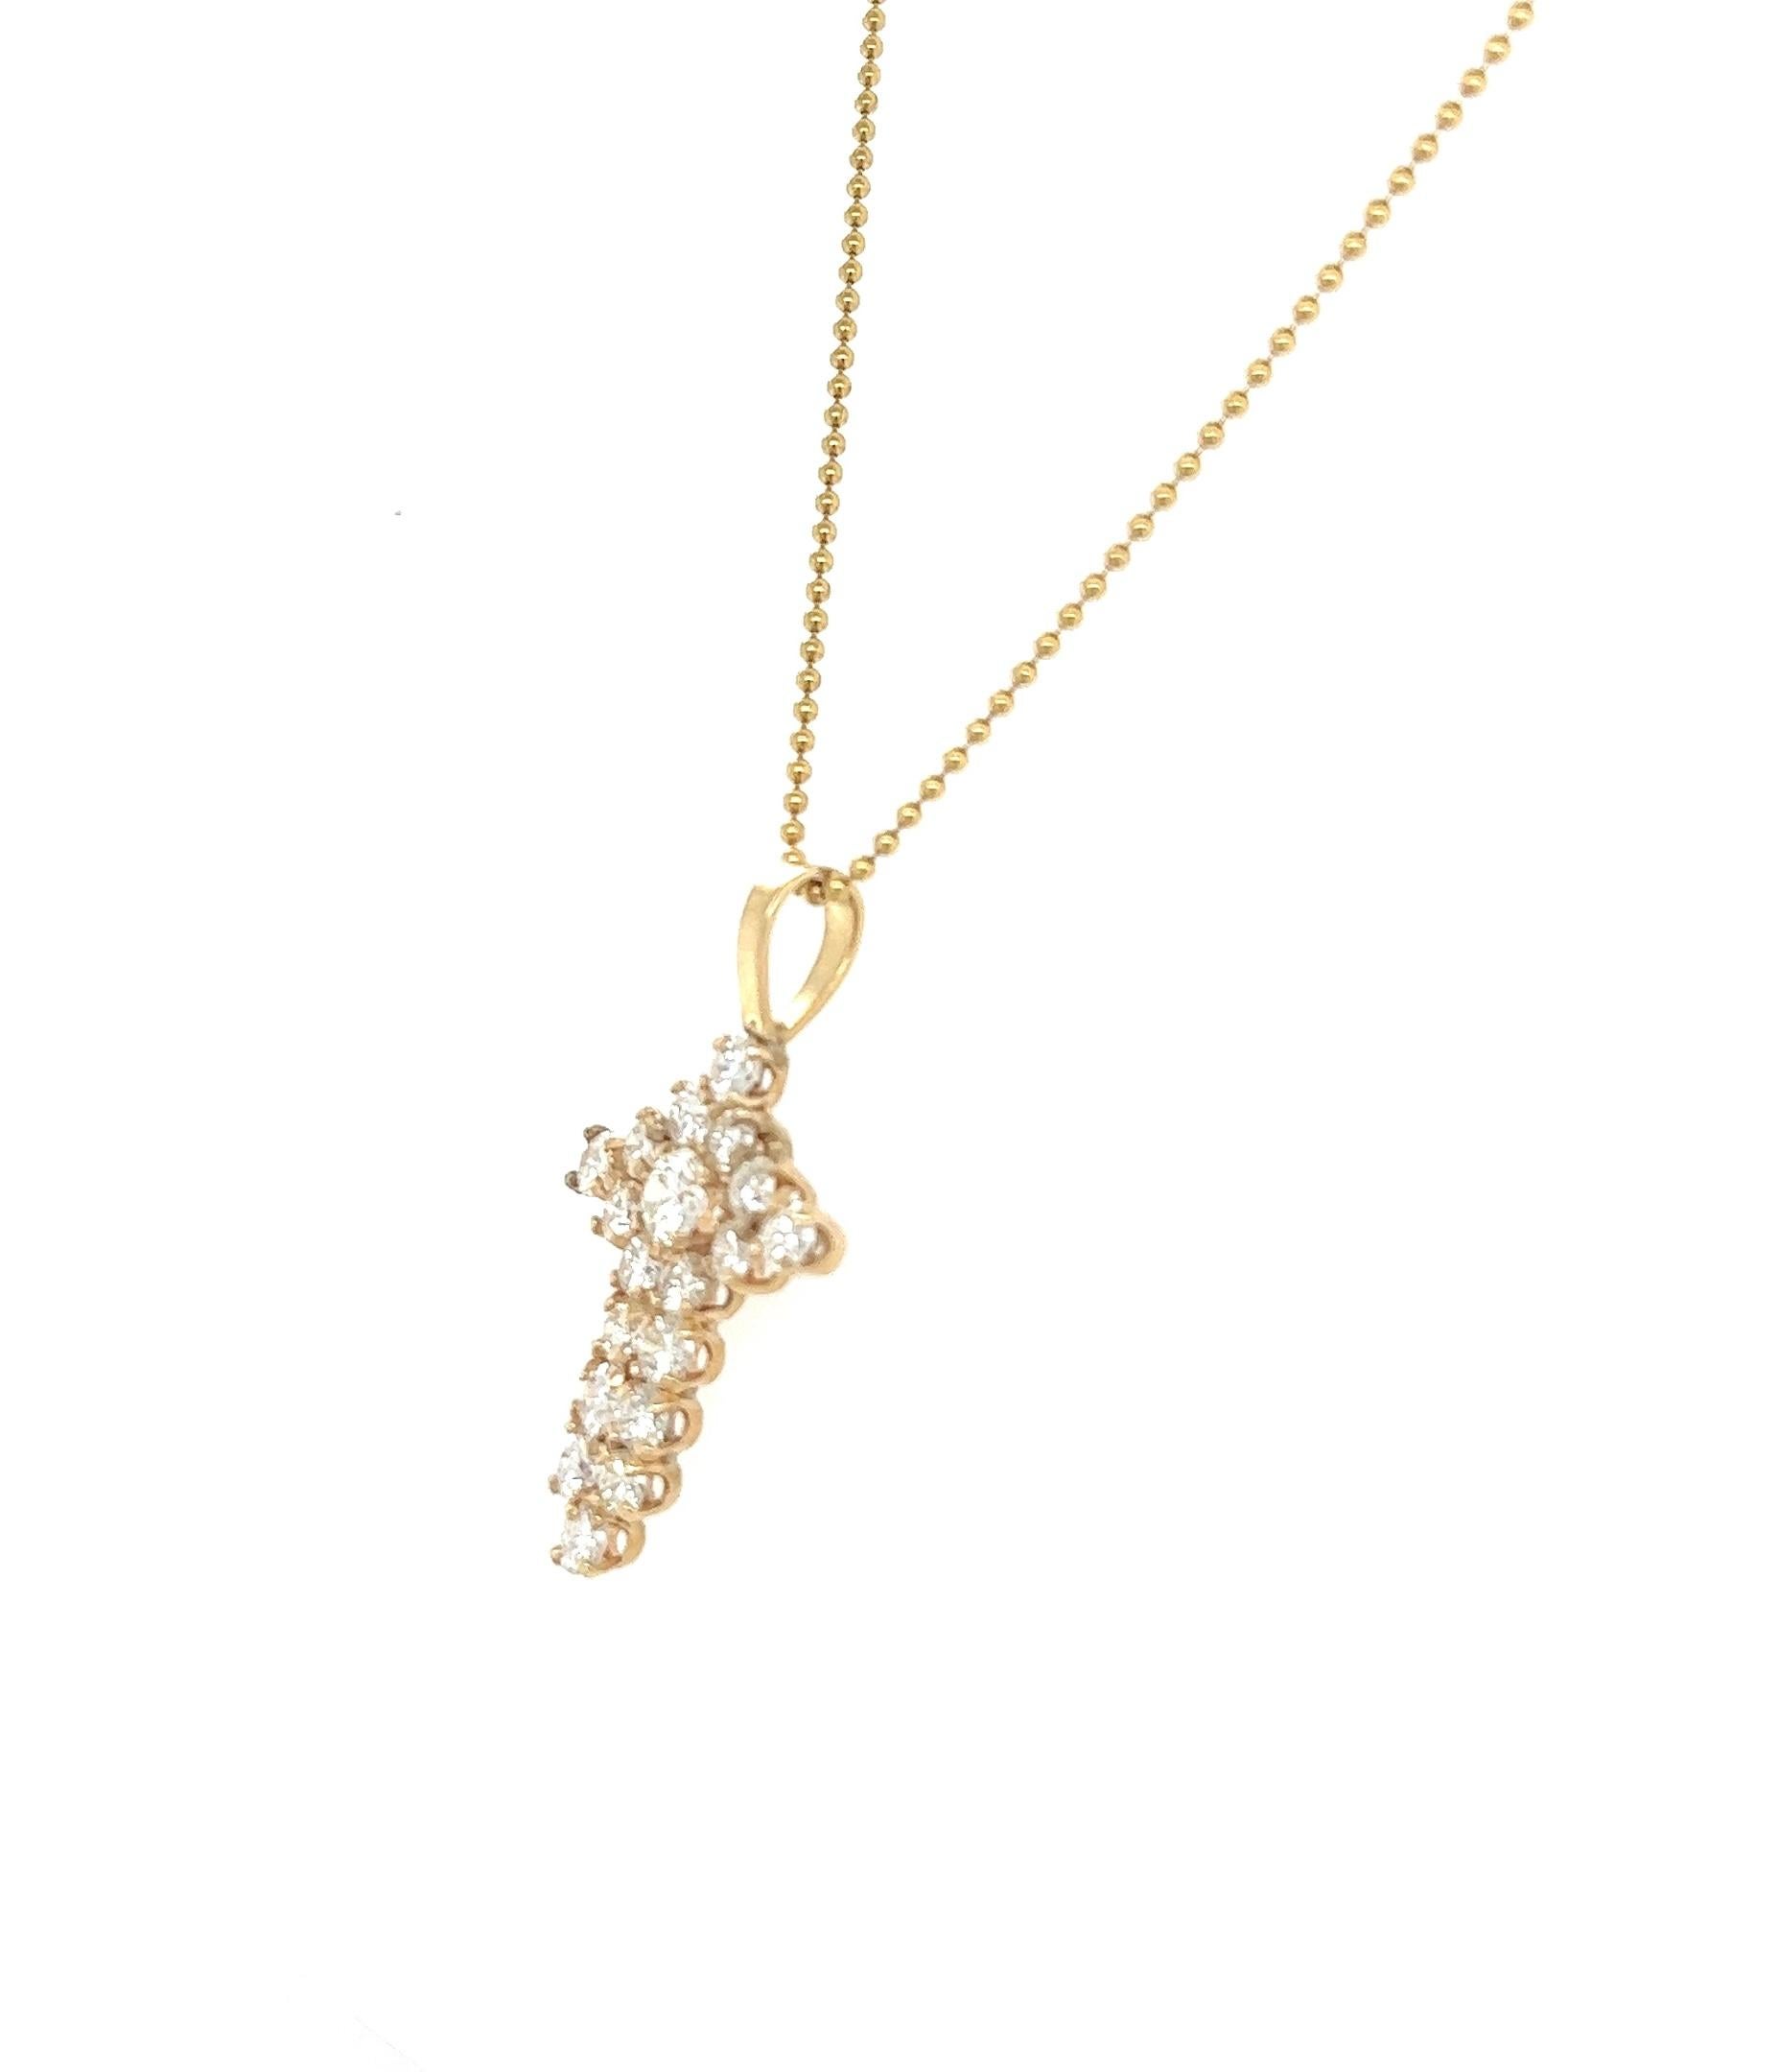 This beautiful cross pendant has 2.05 carats of Natural Round Cut Diamonds. The clarity and color is VS-I. 

Curated in 14 Karat Yellow Gold and has an approximate weight of 4.5 grams. 

The length of the chain pendant is 16 inches long. 